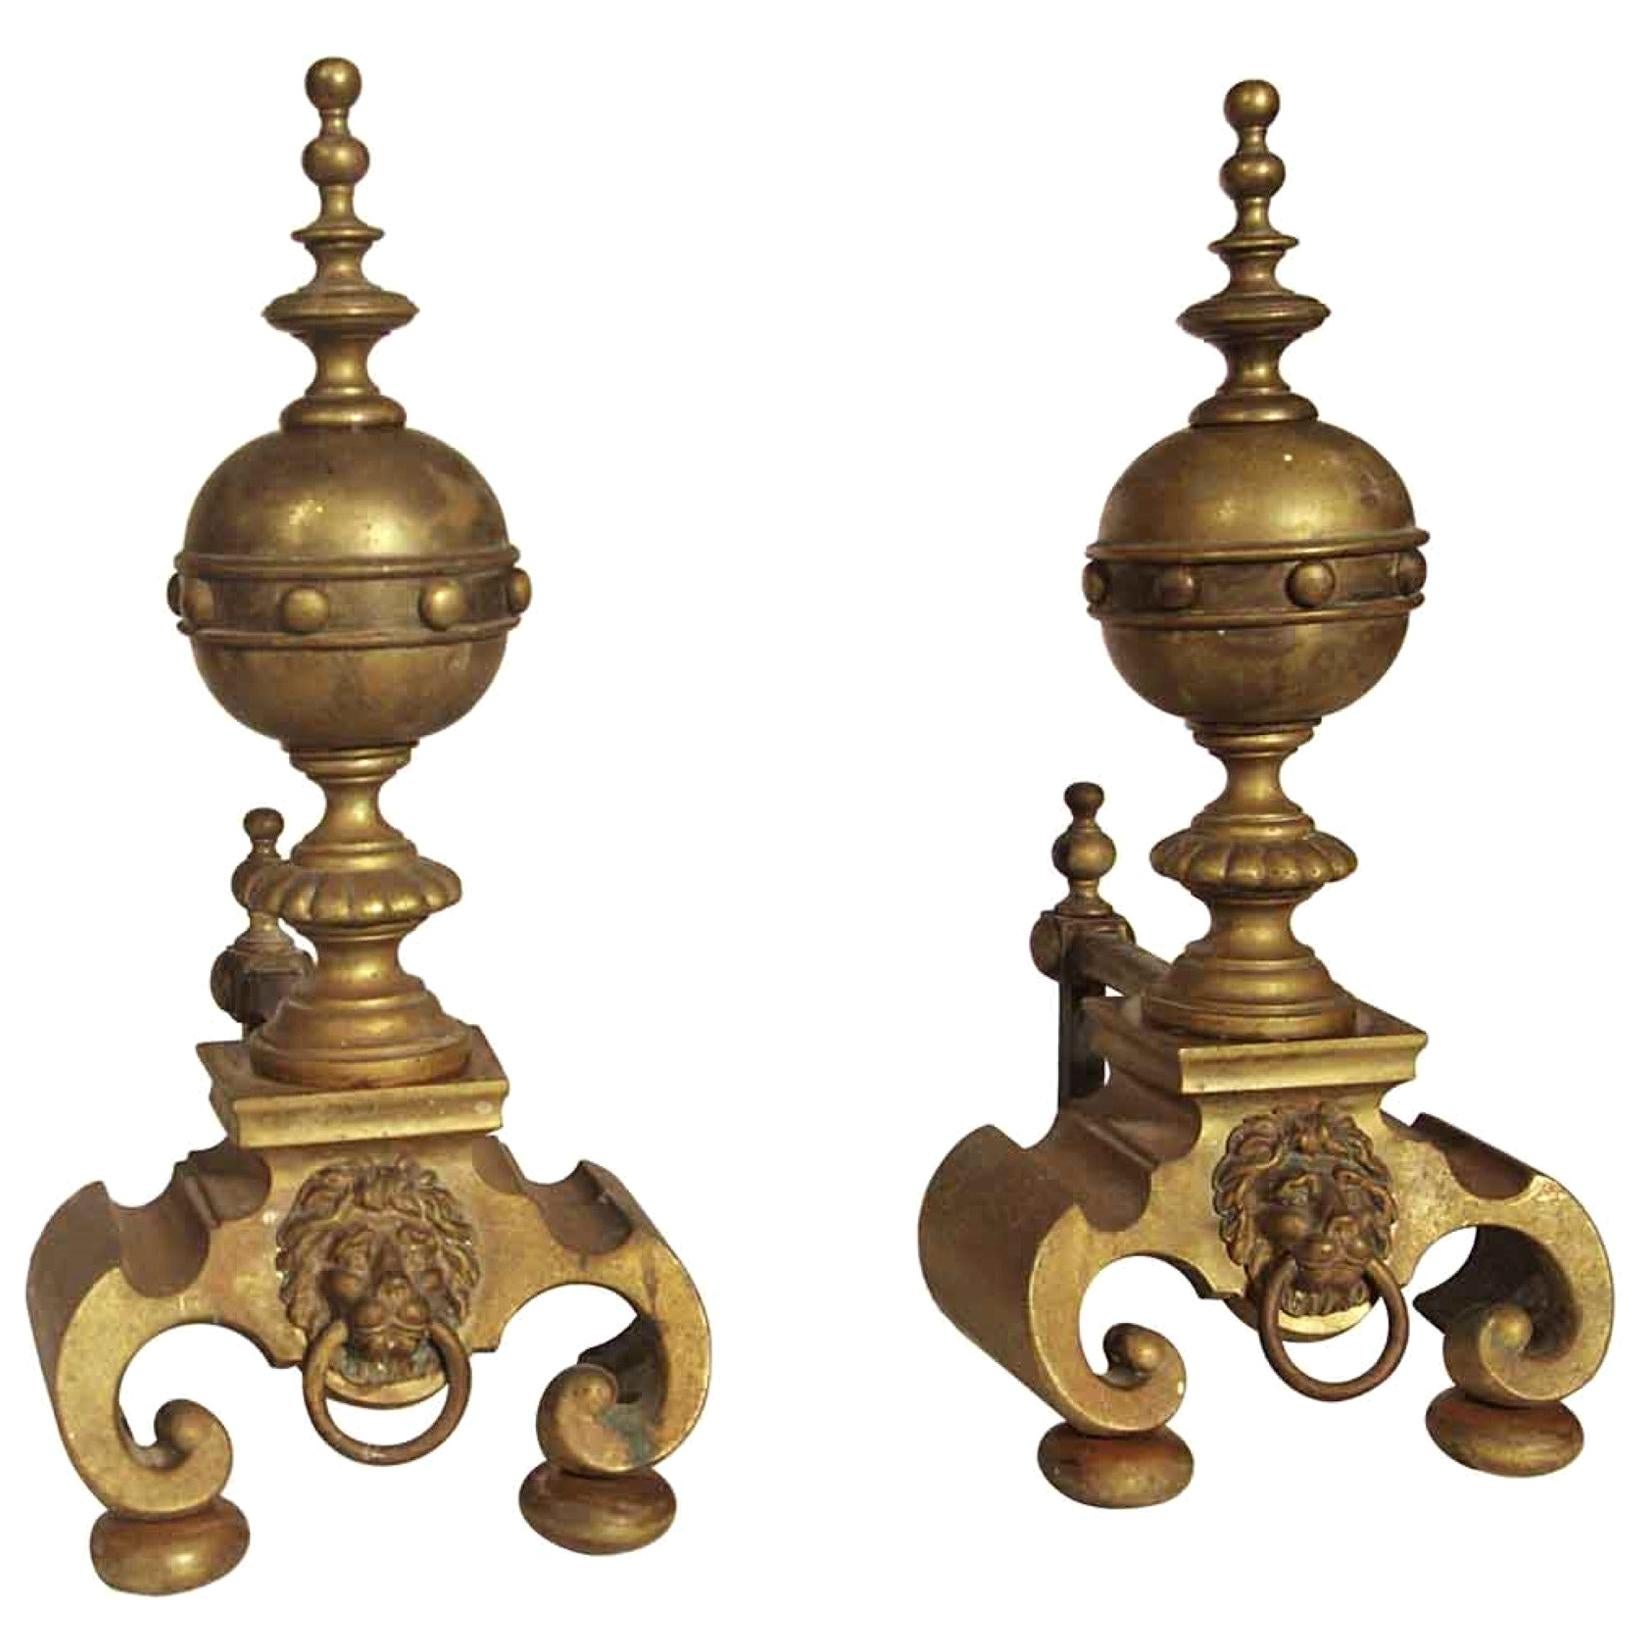 1920s Pair of Lion Brass Andirons with Large Decorated Ball Finials